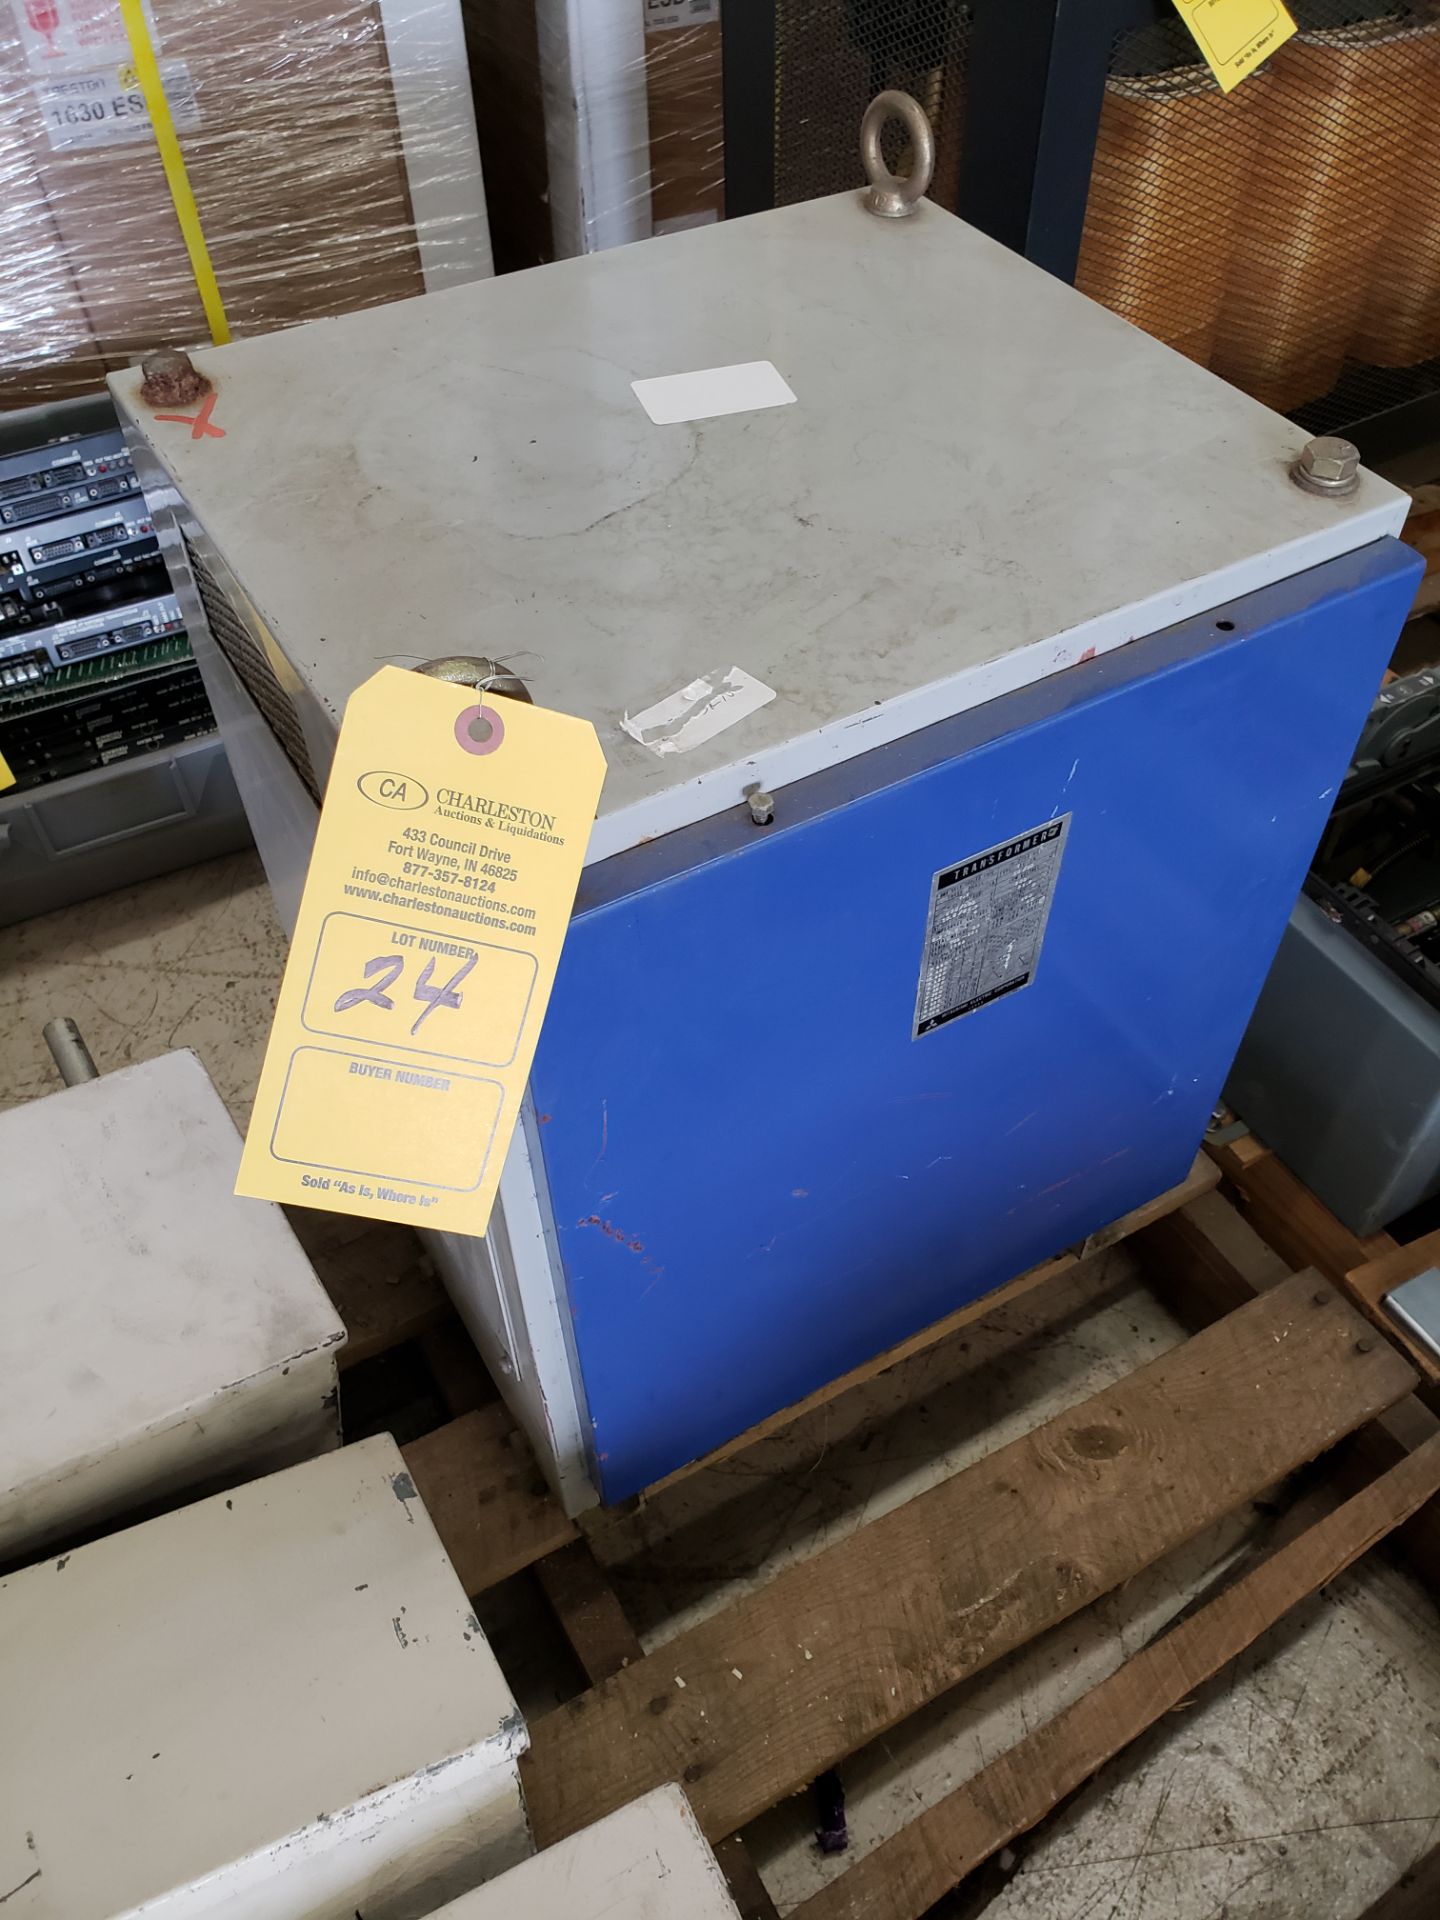 MITSUBISHI TRANSFORMER DRY-SELF COOLED 7.5 KA 50/60 HZ (LOCATED AT 432 COUNCIL DRIVE FORT WAYNE IN